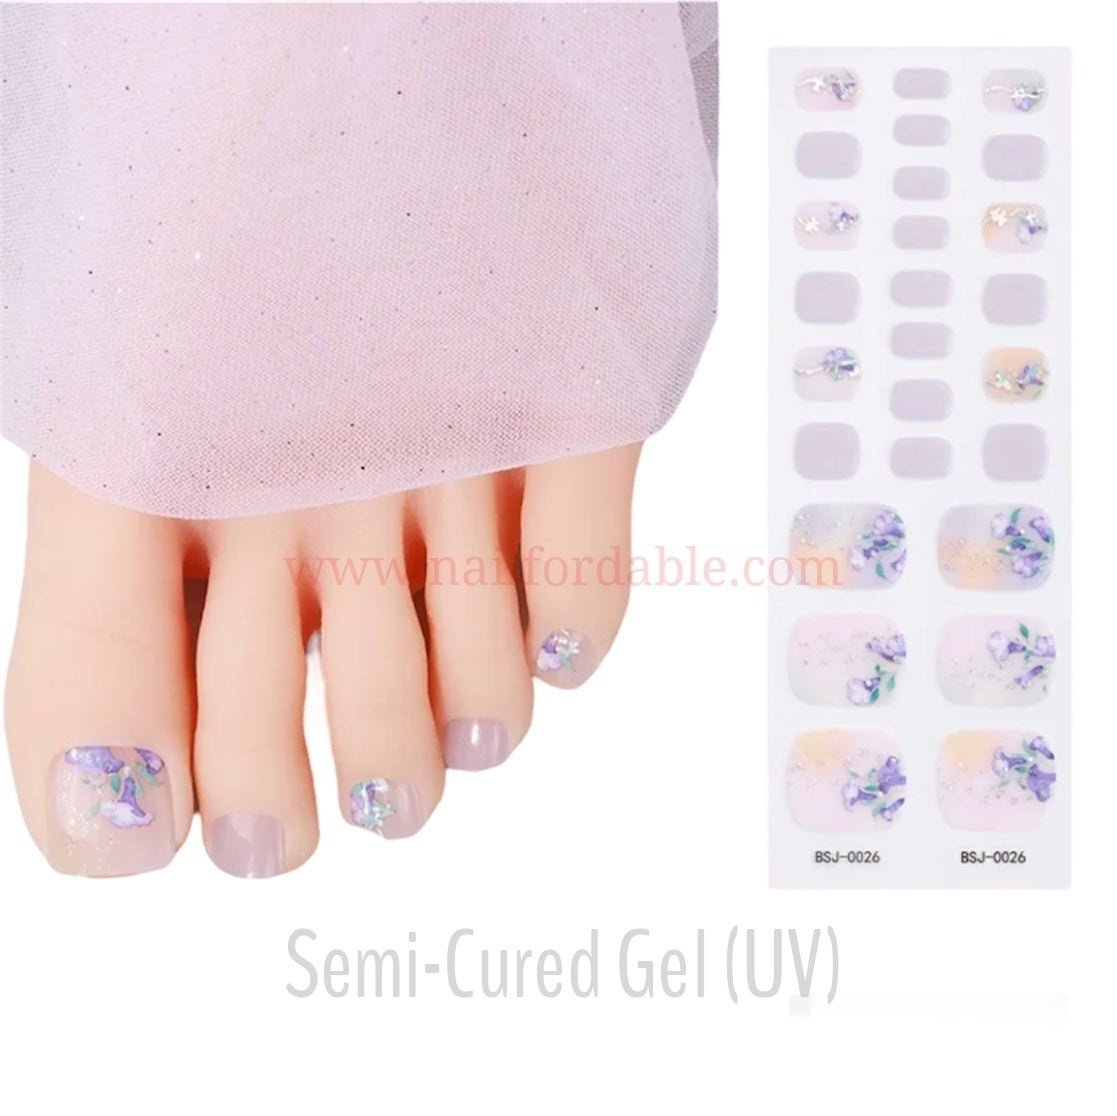 Lilac Flowers- Semi-Cured Gel Wraps UV | Nail Wraps | Nail Stickers | Nail Strips | Gel Nails | Nail Polish Wraps - Nailfordable